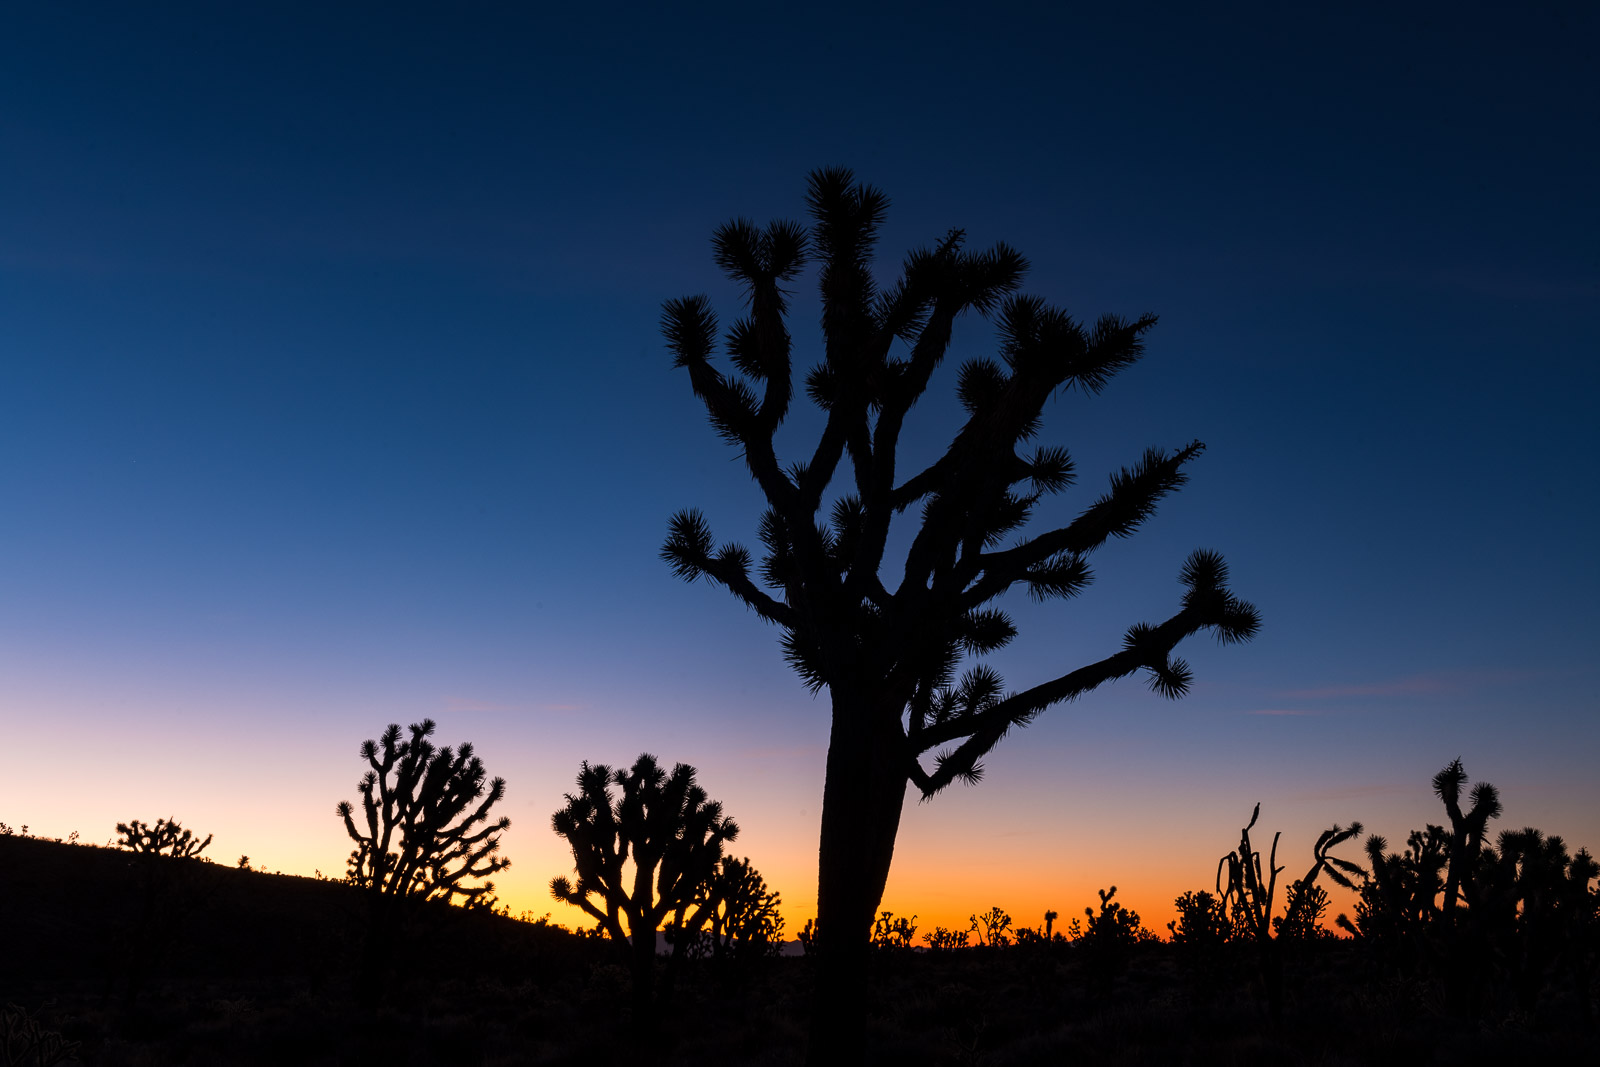 A cluster of Joshua Trees sillhouette against the colors of dusk in the Wee Thump Joshua Tree Wilderness, Nevada.